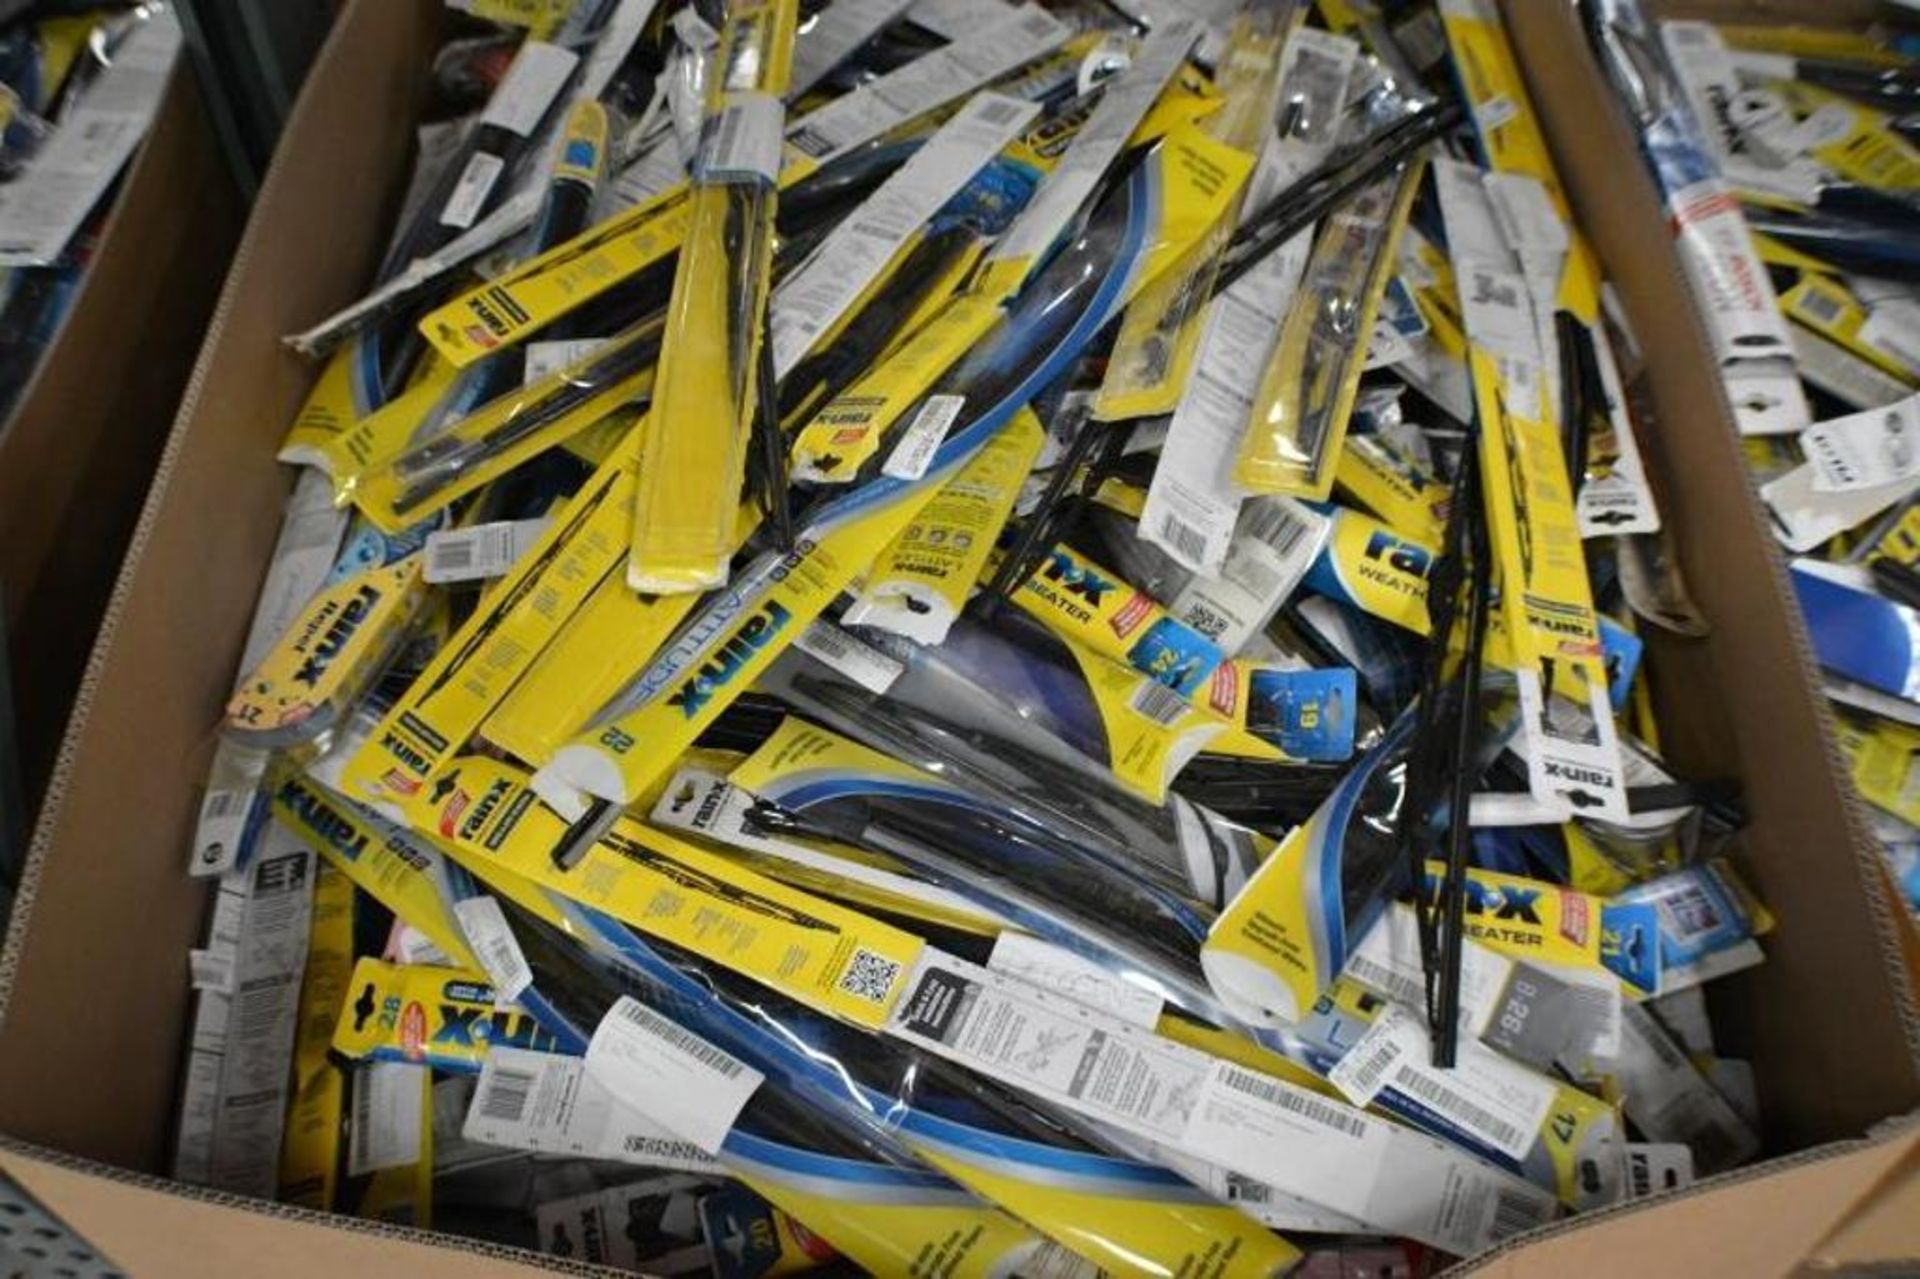 Wiper Blades. Assorted Brands and Sizes. Contents of Pallet - Image 2 of 3